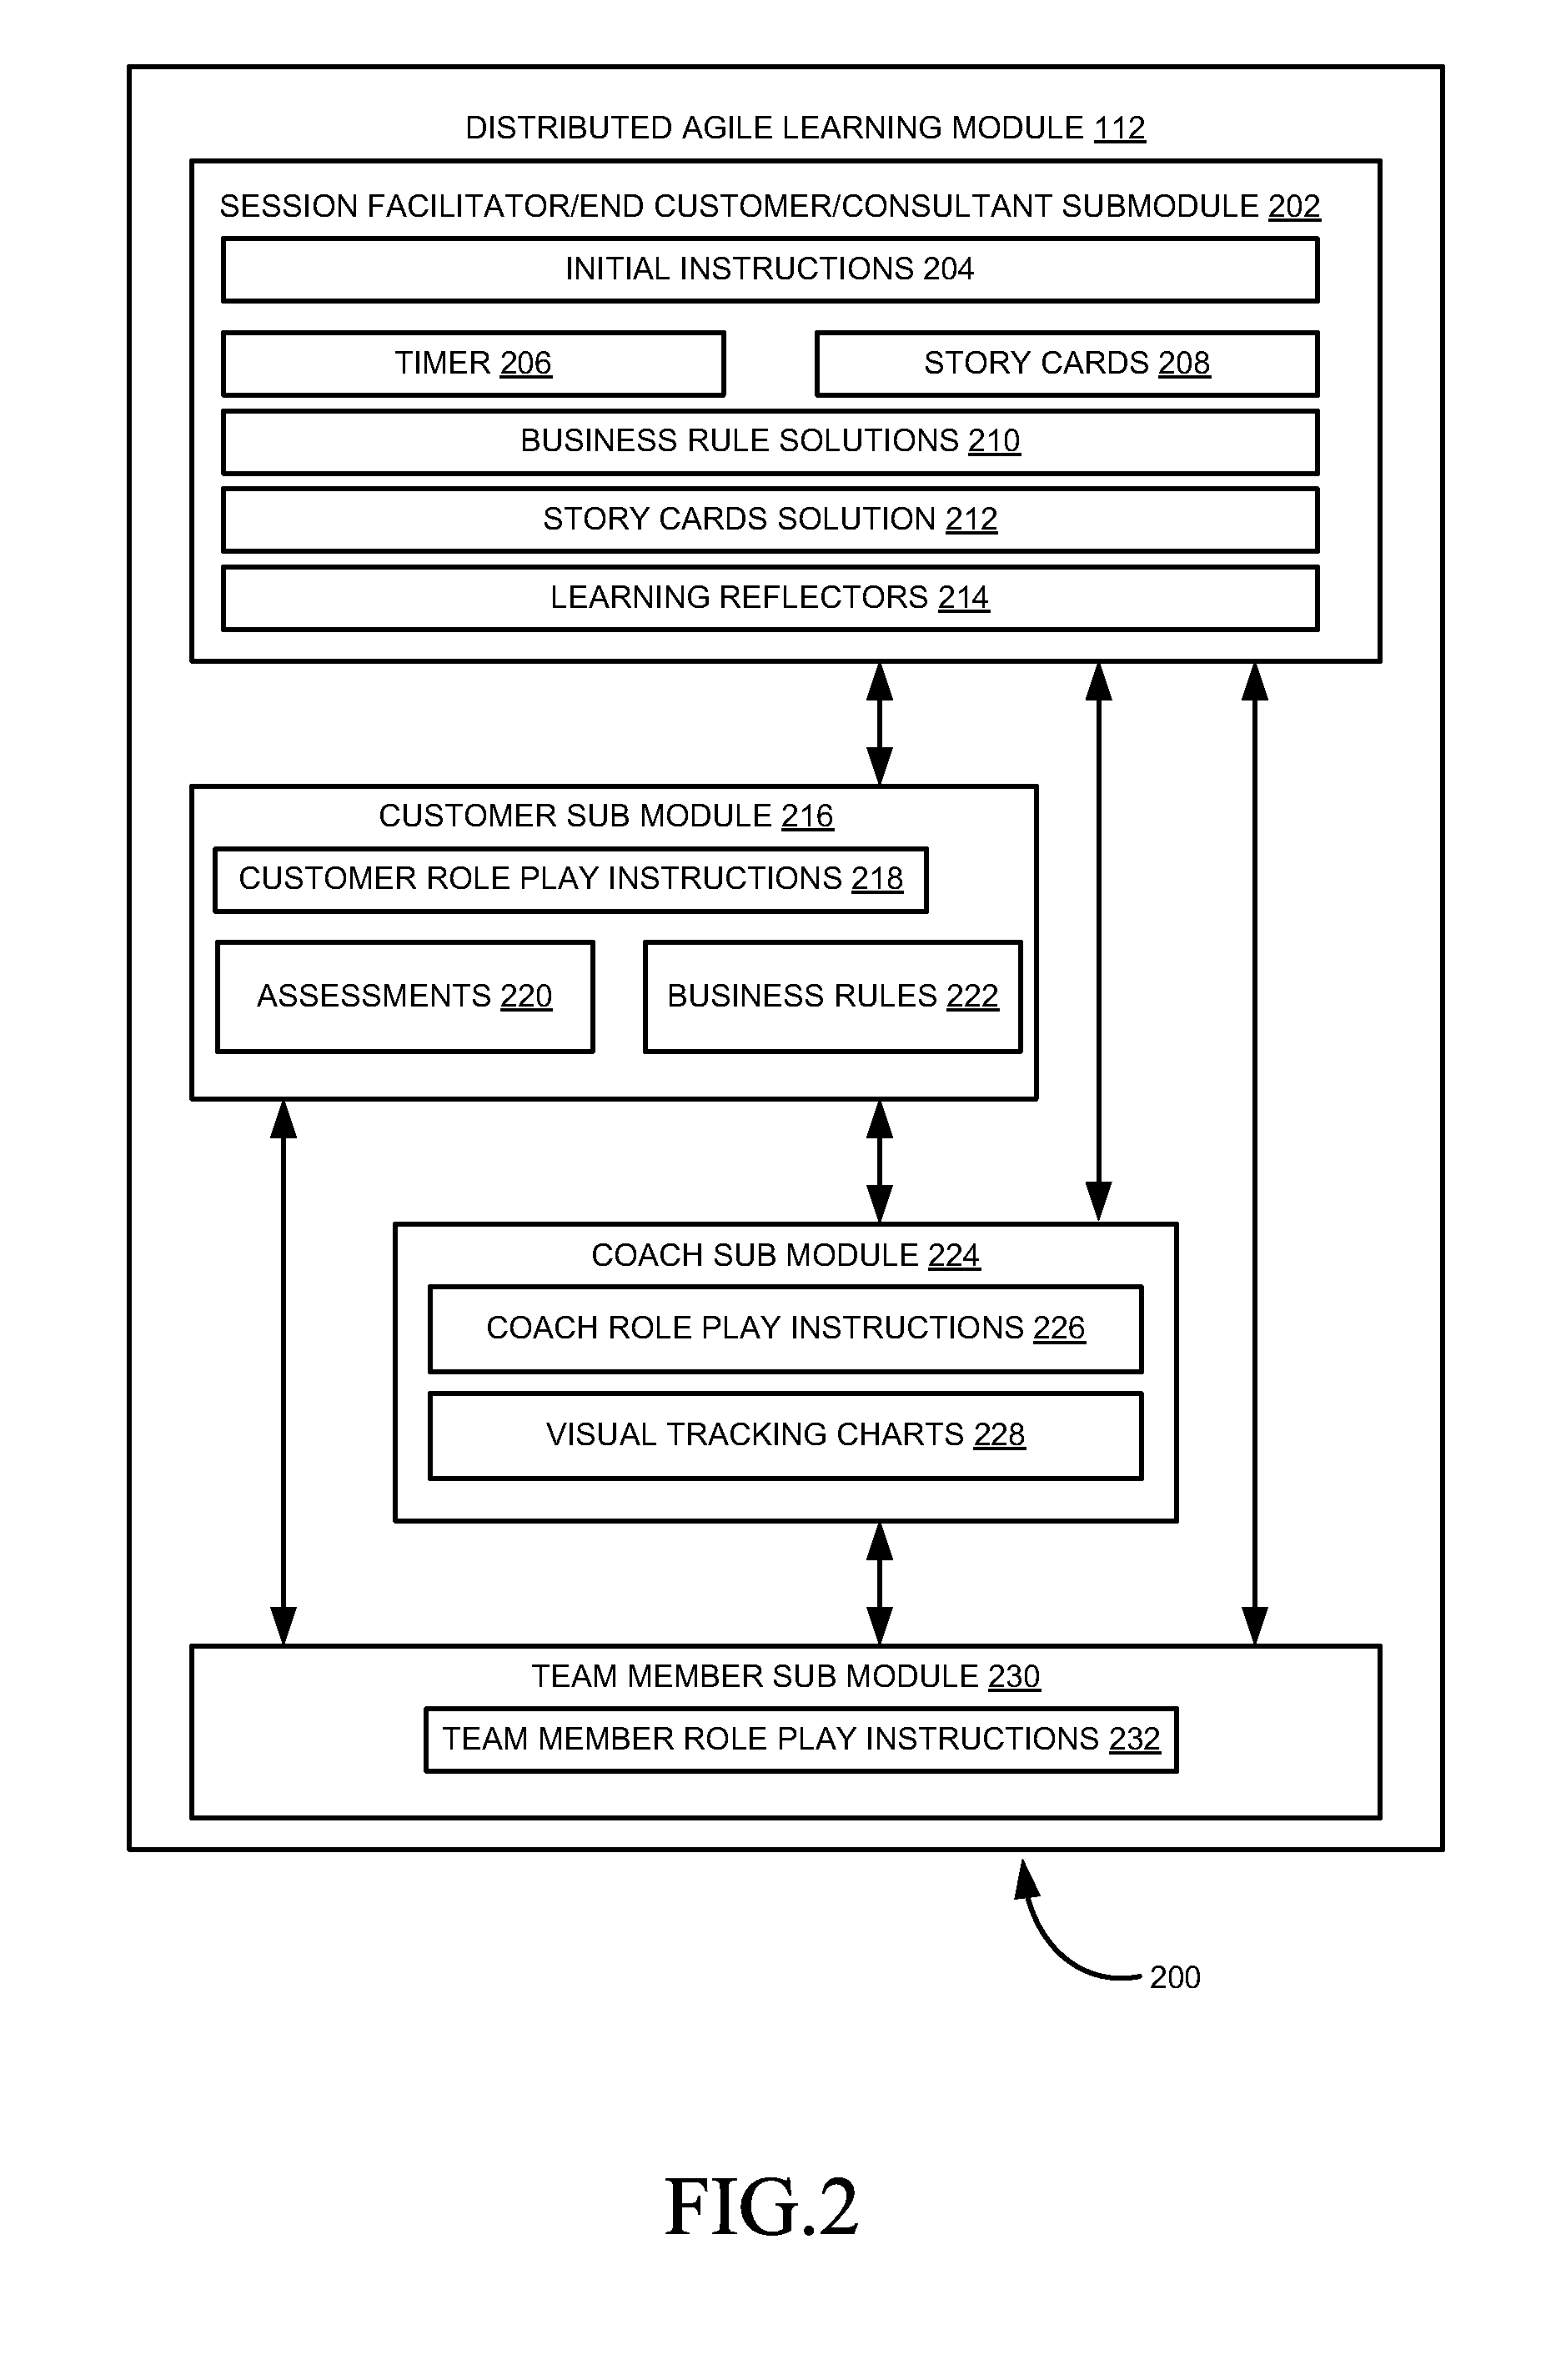 System and method for distributed agile